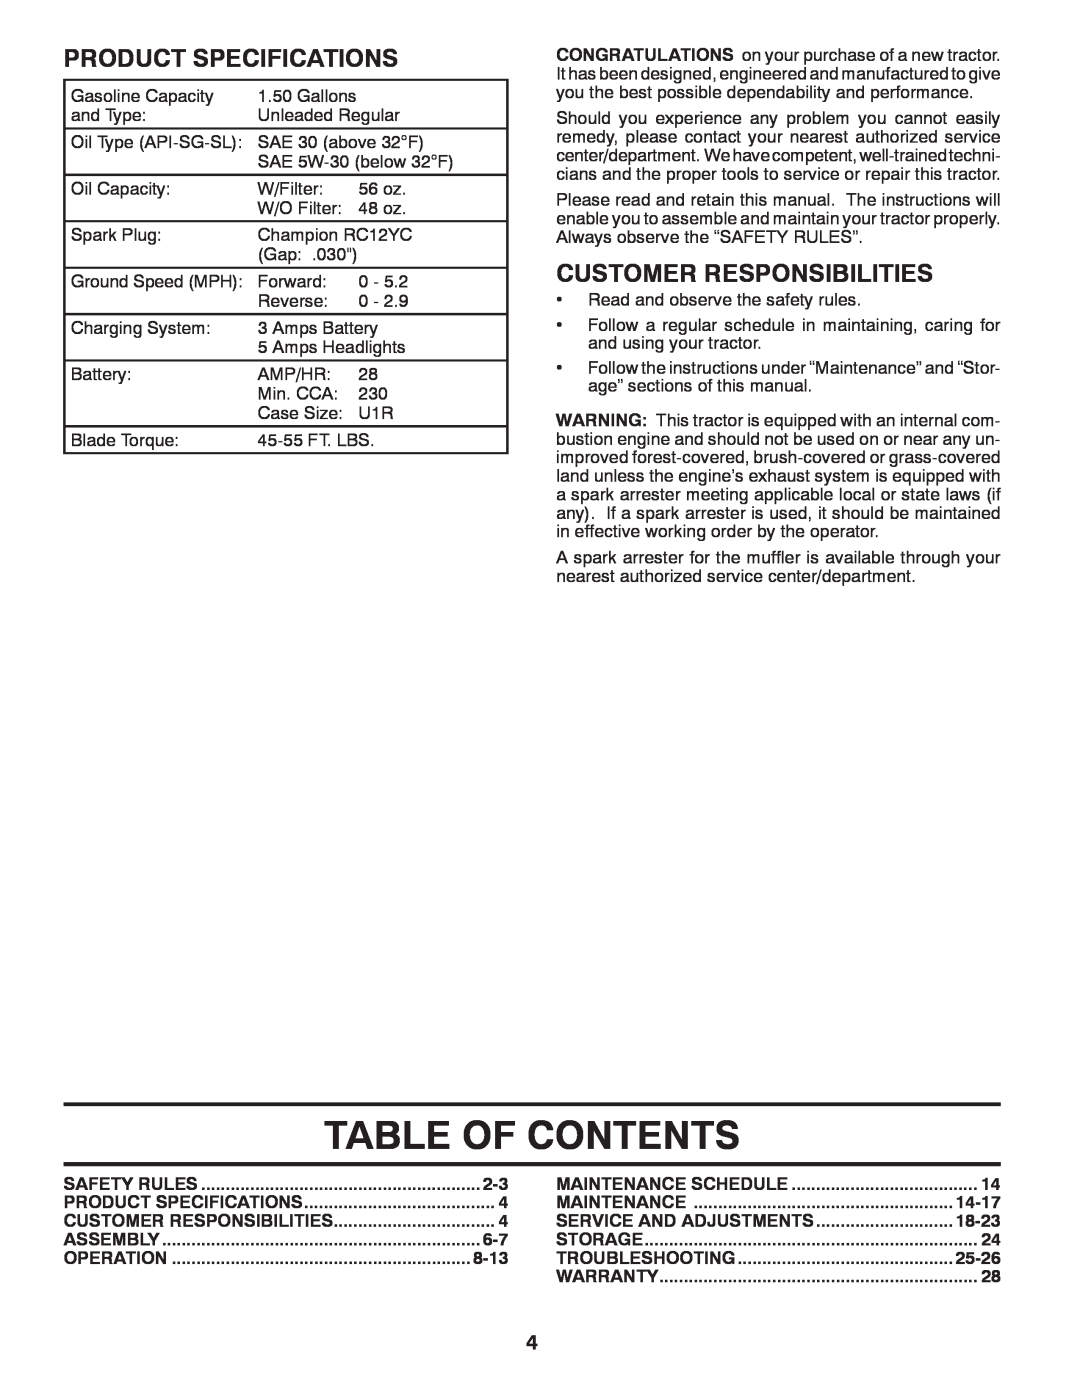 McCulloch 96041018001 manual Table Of Contents, Product Specifications, Customer Responsibilities 